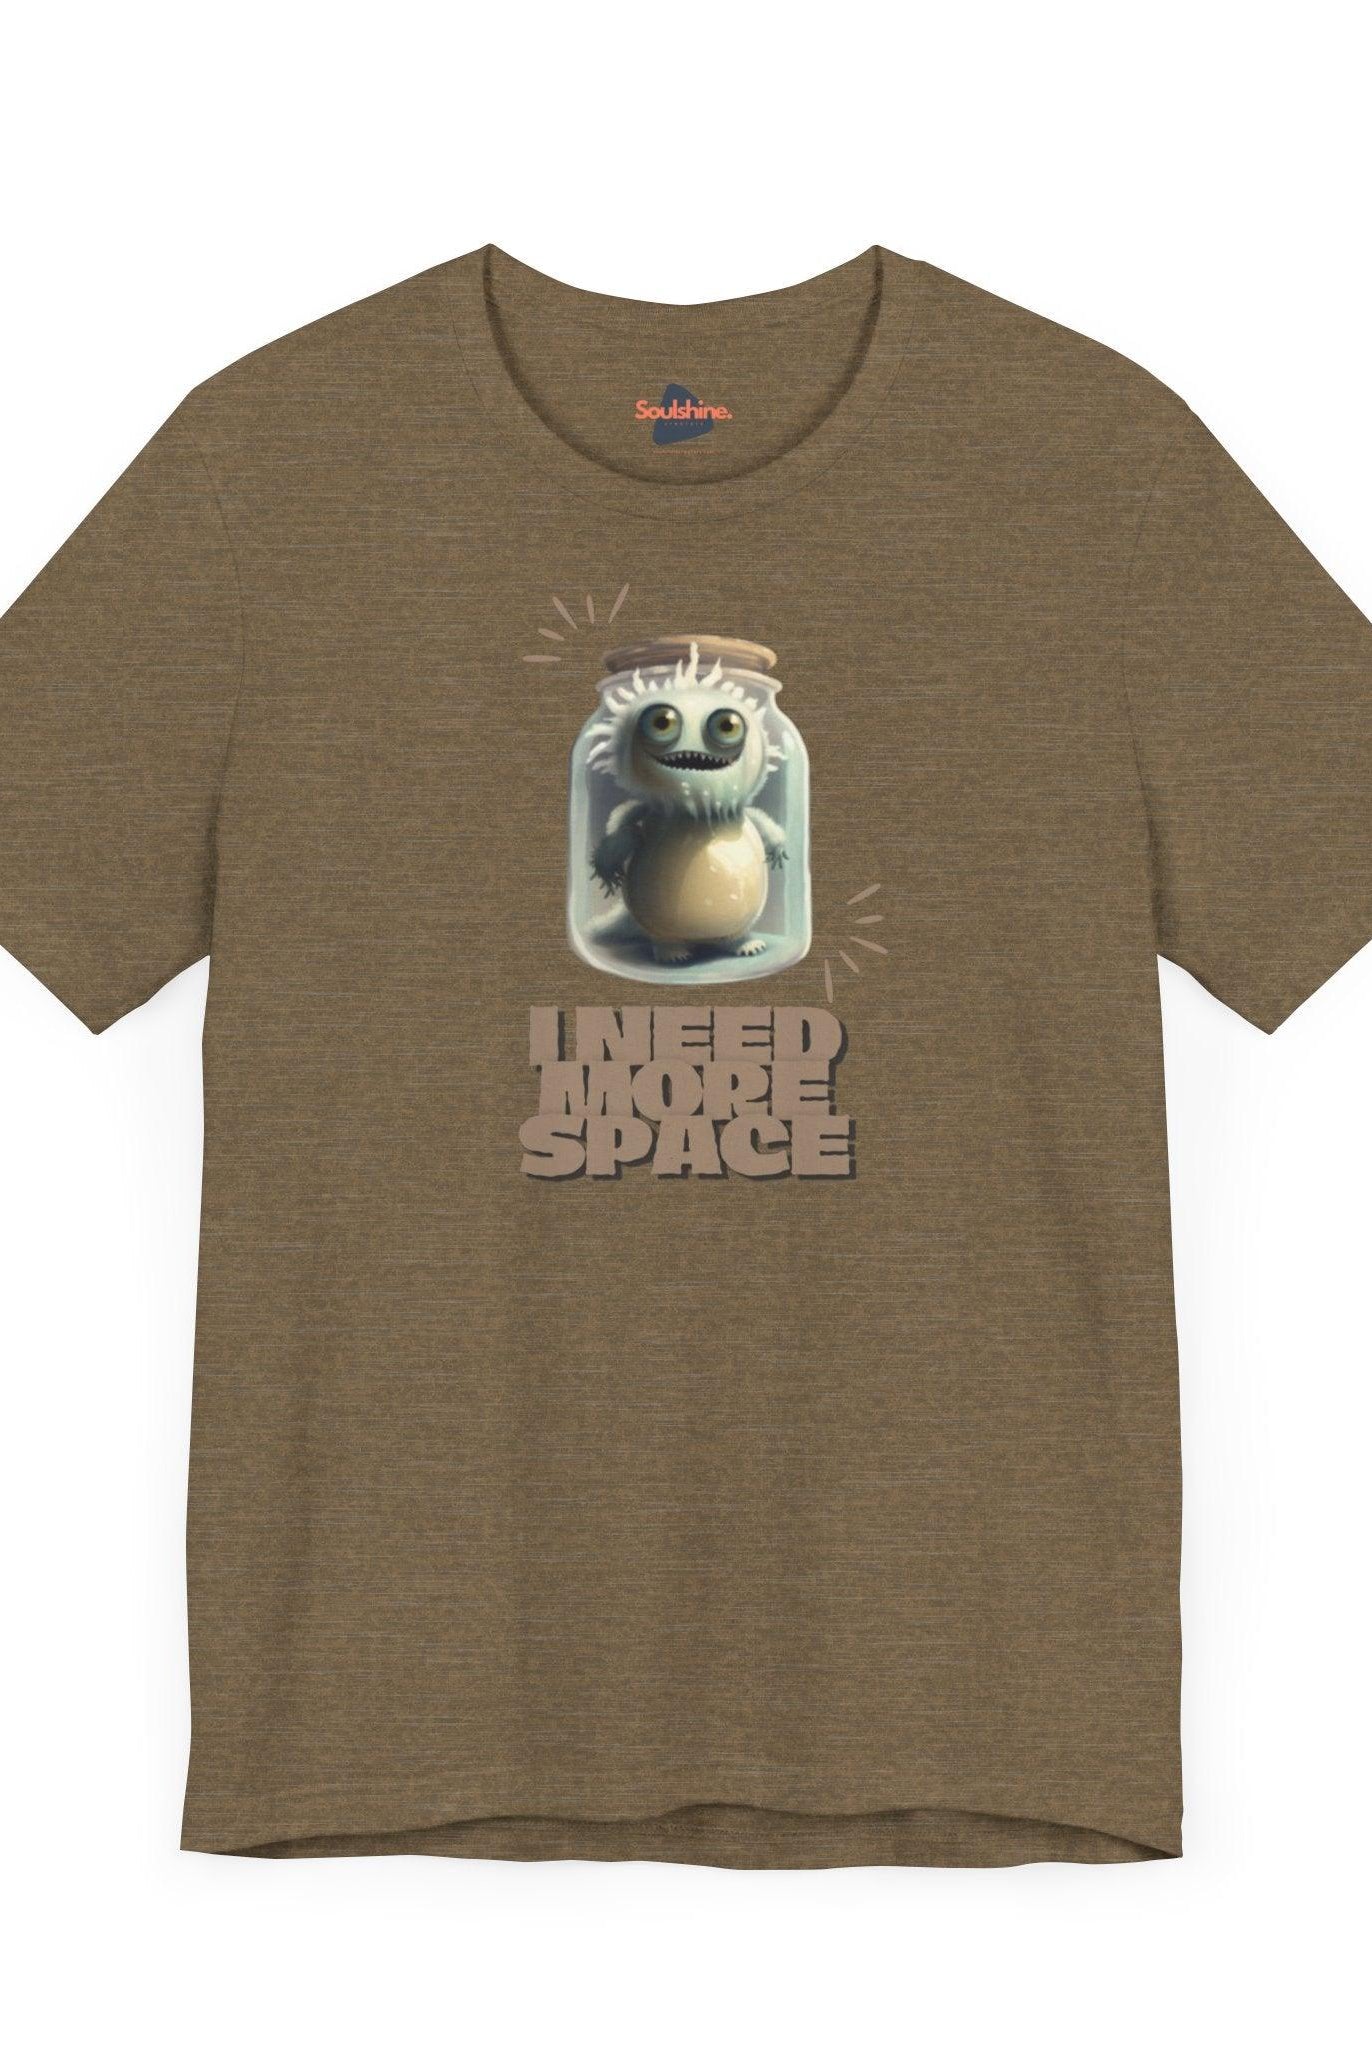 I need more space - Funny T-Shirt - Soulshinecreators - Bella & Canvas - EU T-Shirt by Soulshinecreators | Soulshinecreators